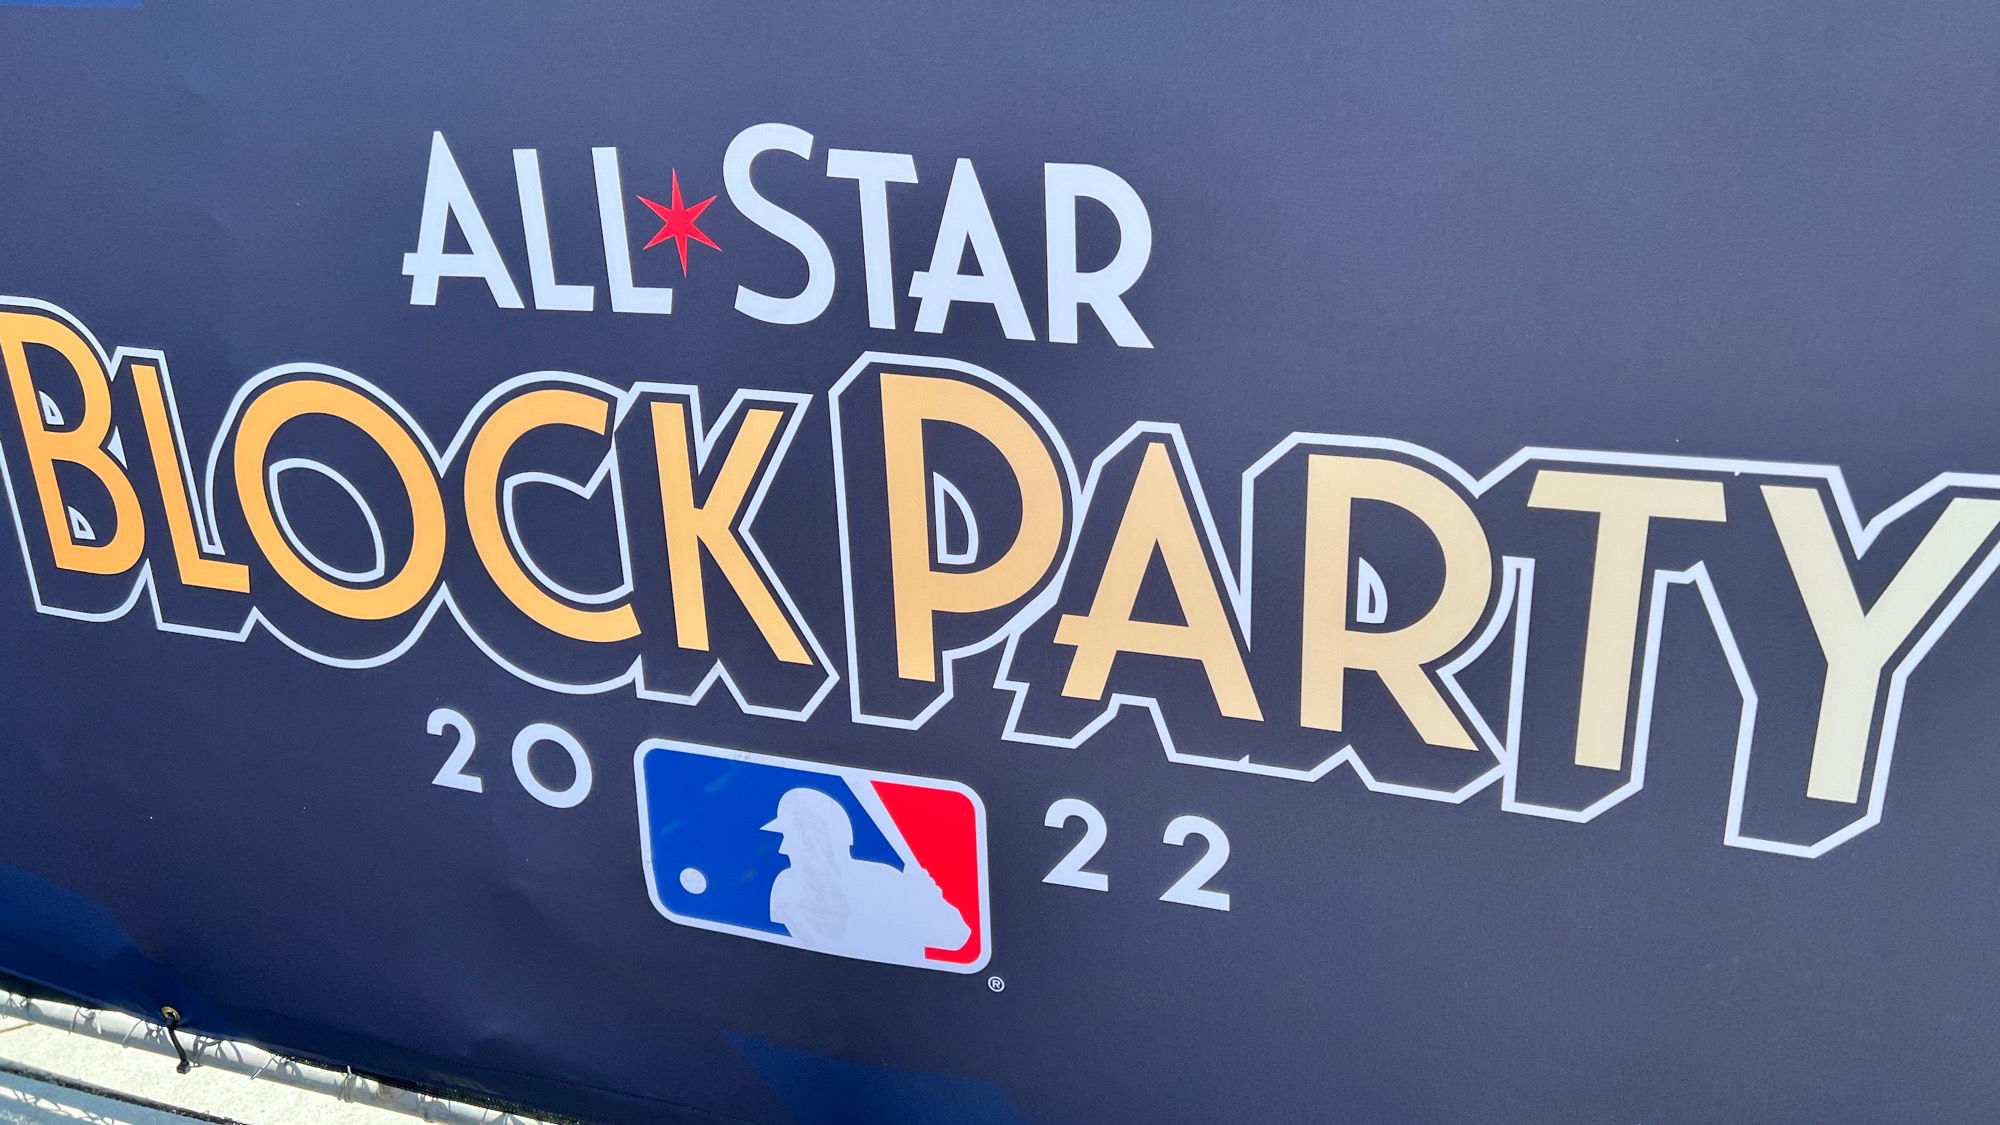 All Star Block Party 2022 Sign